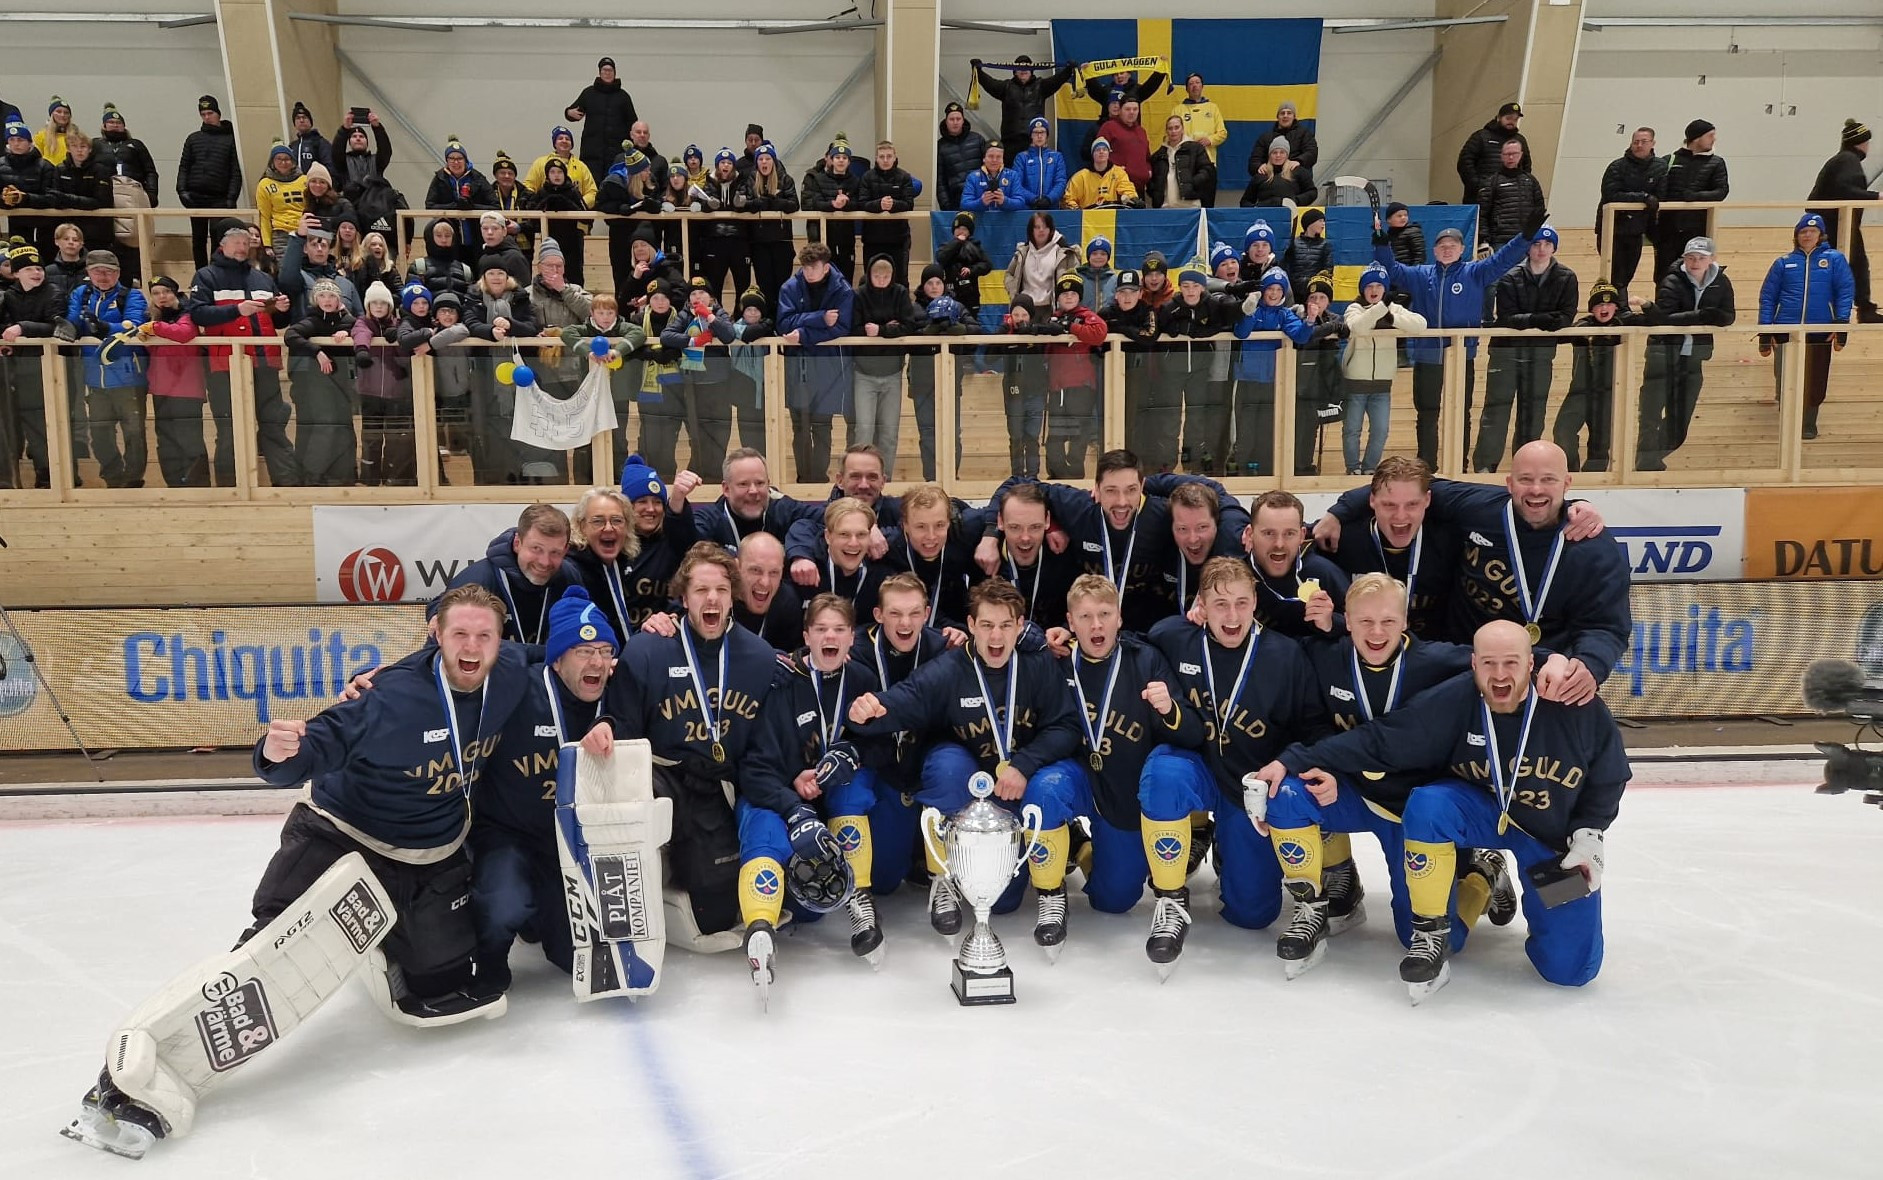 It was a case of double delight for hosts Sweden as they won the men's Bandy World Championship title after beating Finland 3-1 ©FIB